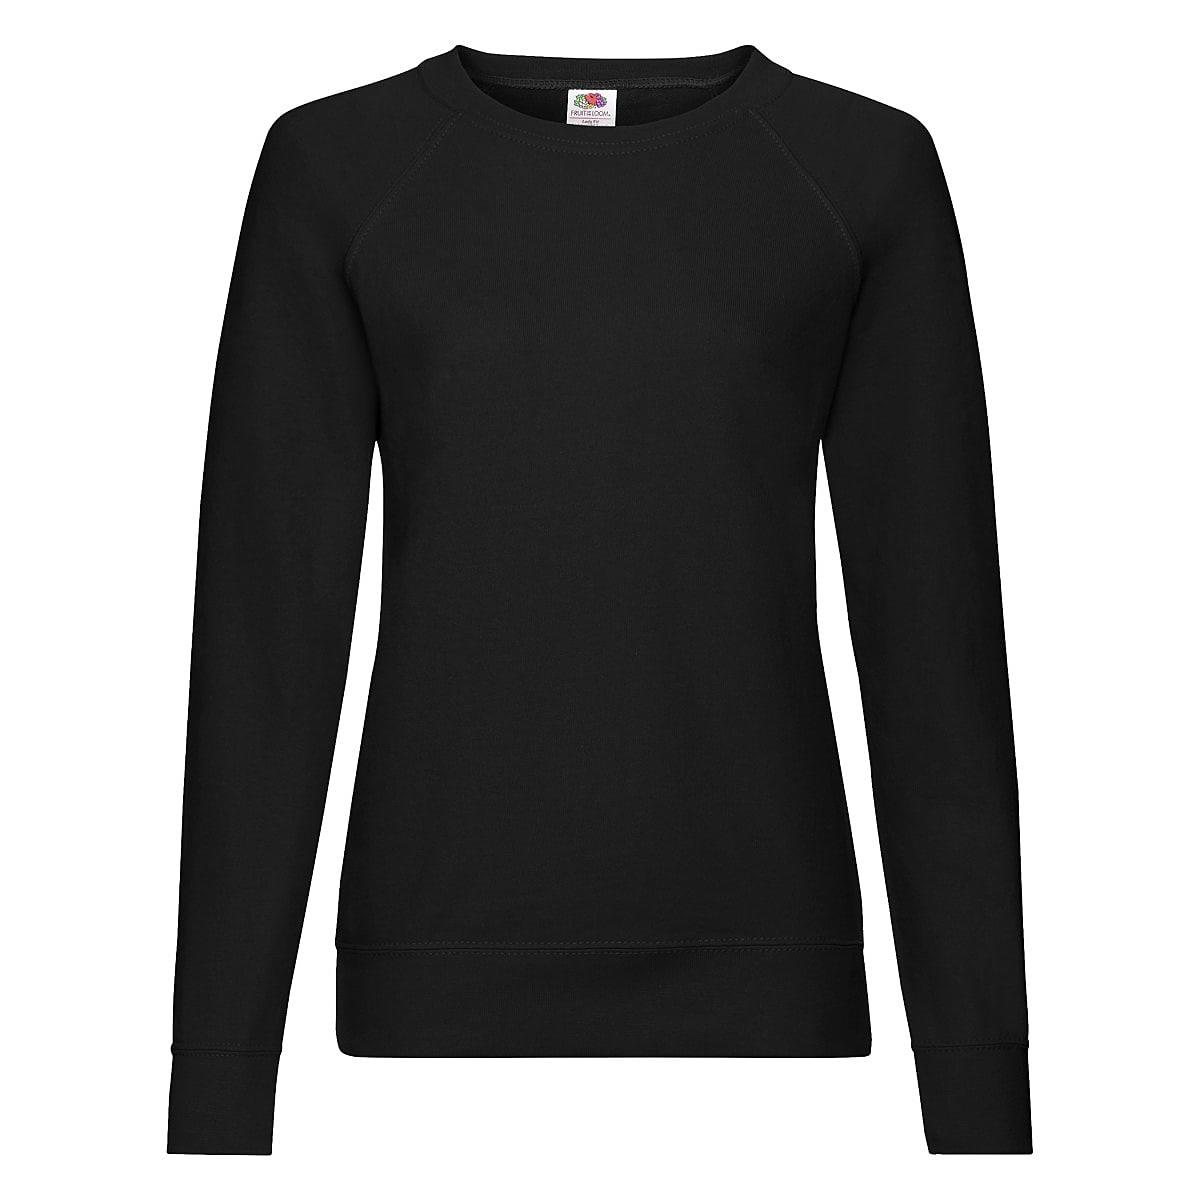 Fruit Of The Loom Lady-Fit Lightweight Raglan Sweater in Black (Product Code: 62146)